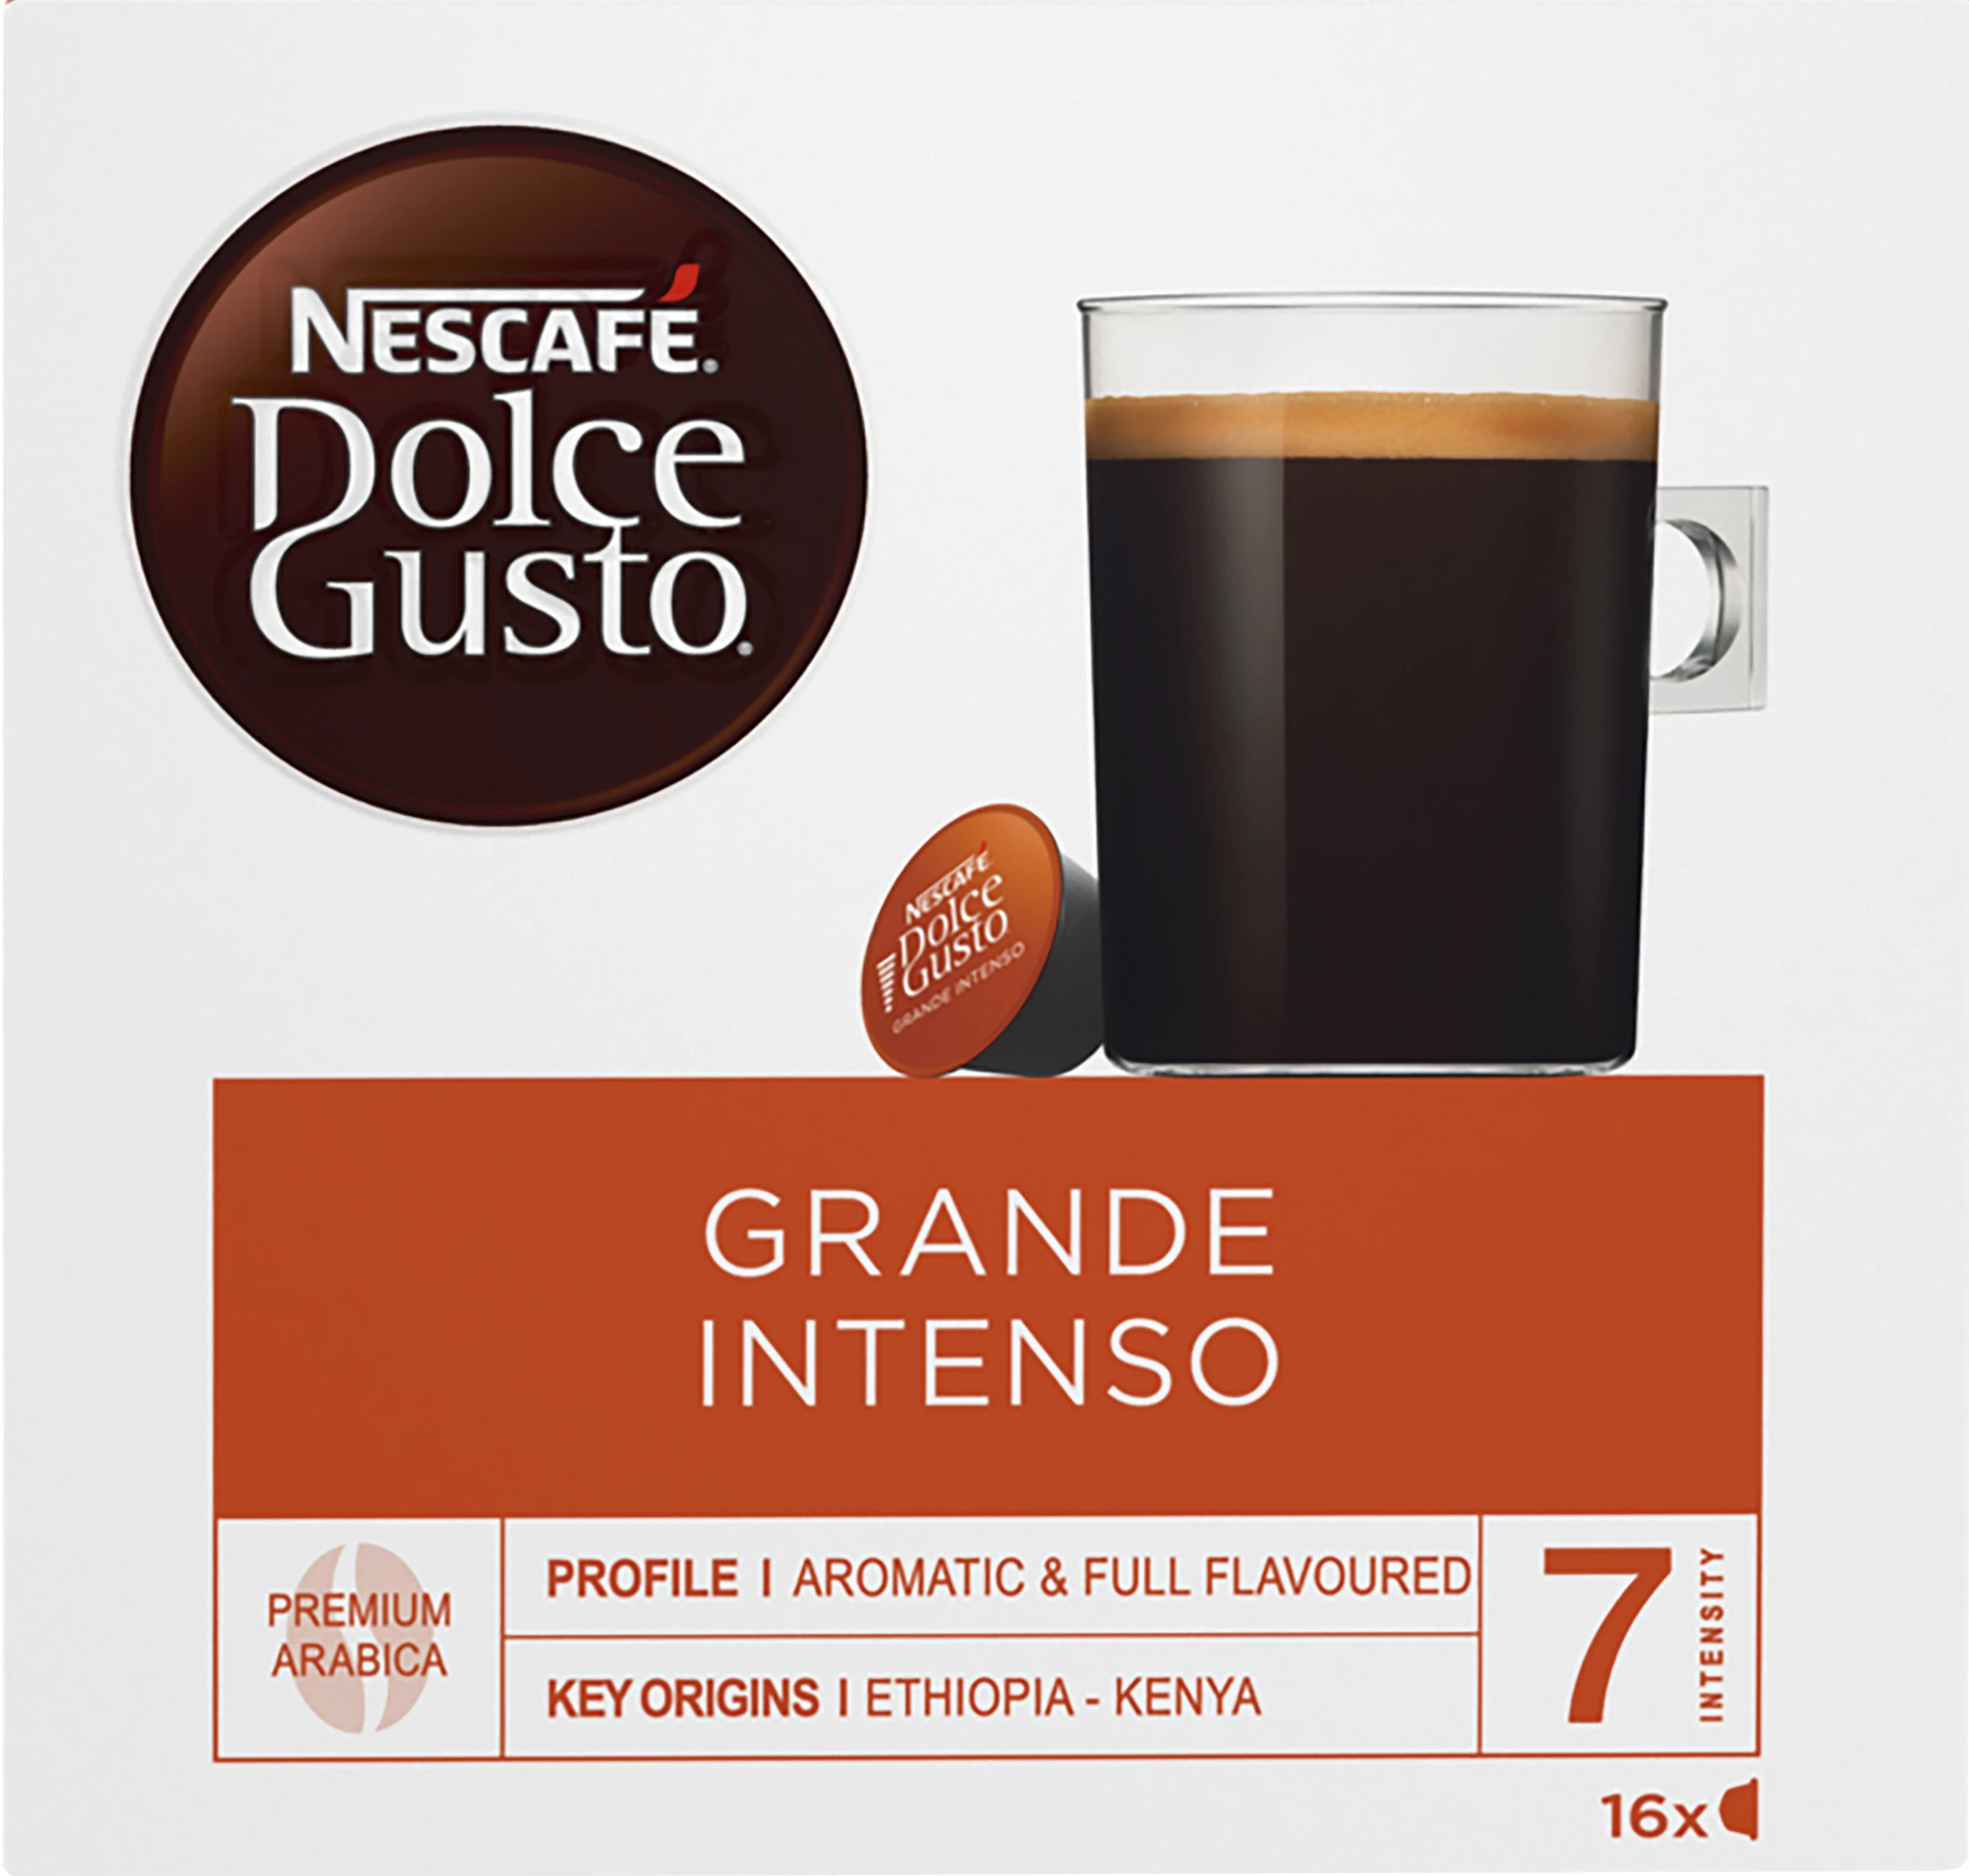 Grote Intense x16 - NESCAFE DOLCE GUSTO